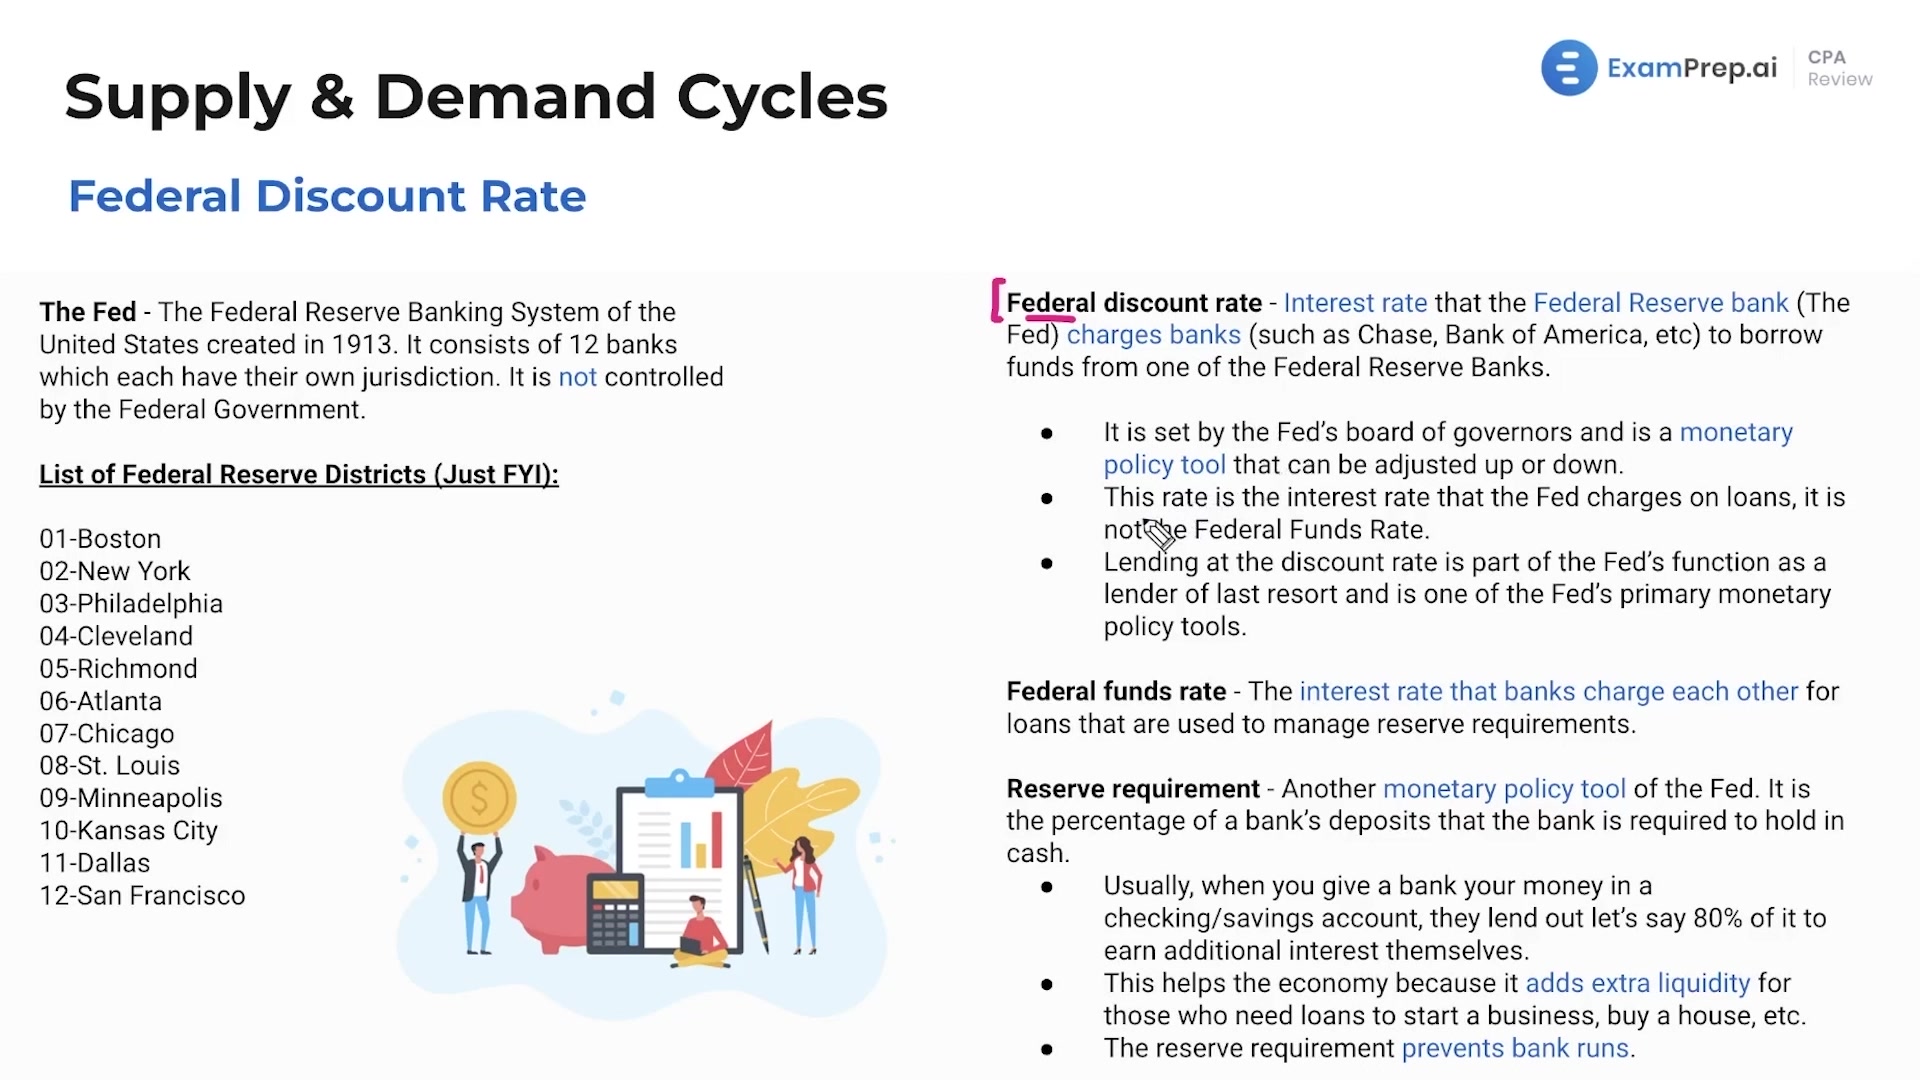 Federal Discount Rate lesson thumbnail